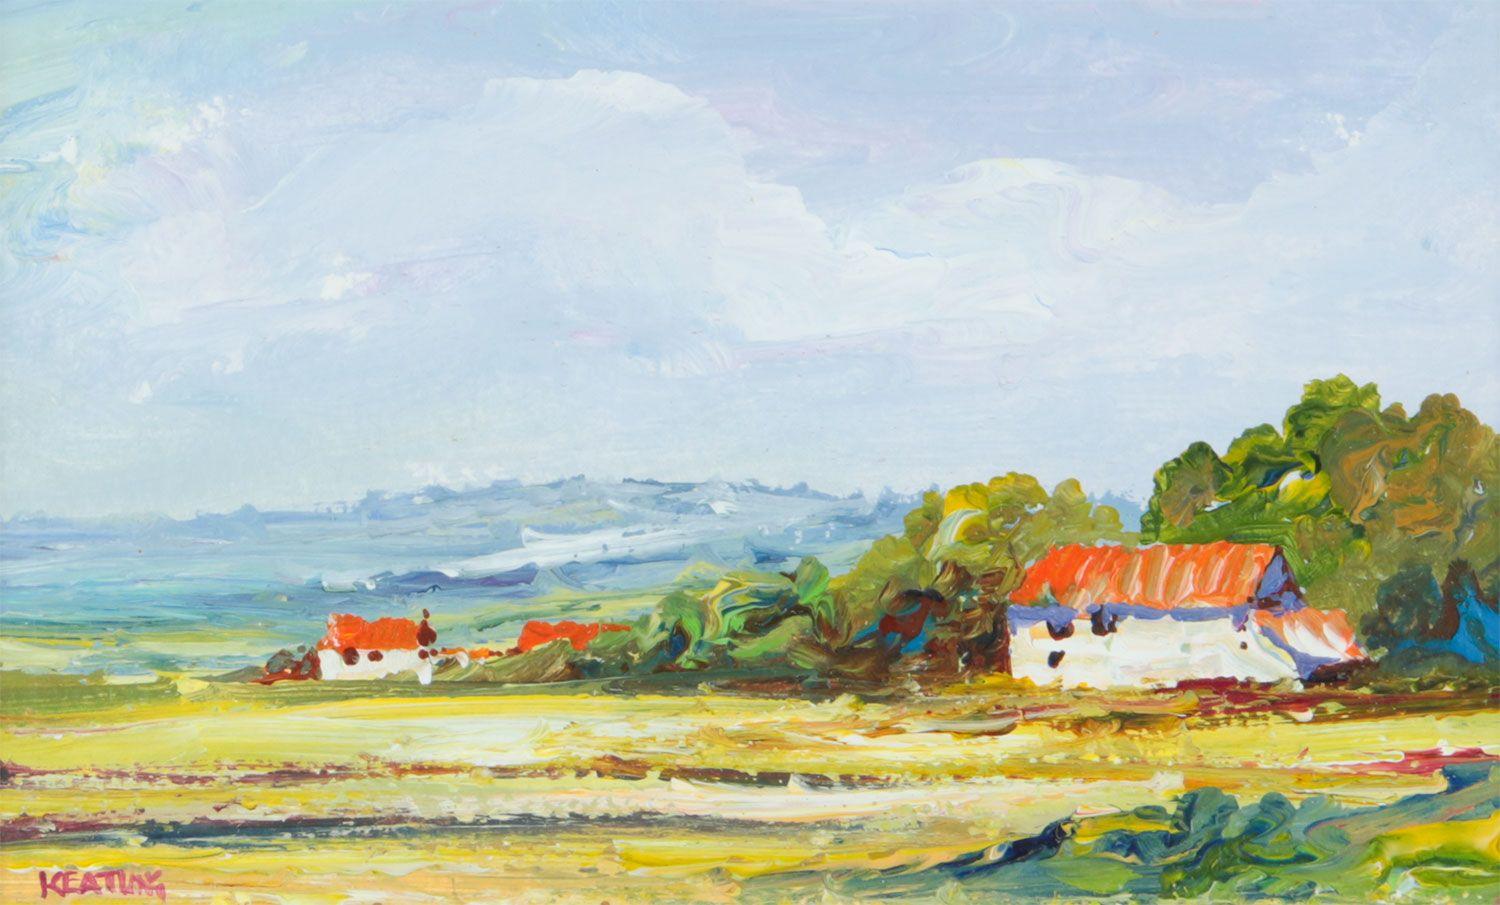 Mediterranean Cottages with Red Roof Tiles in Rural European Countryside - Painting by Keating